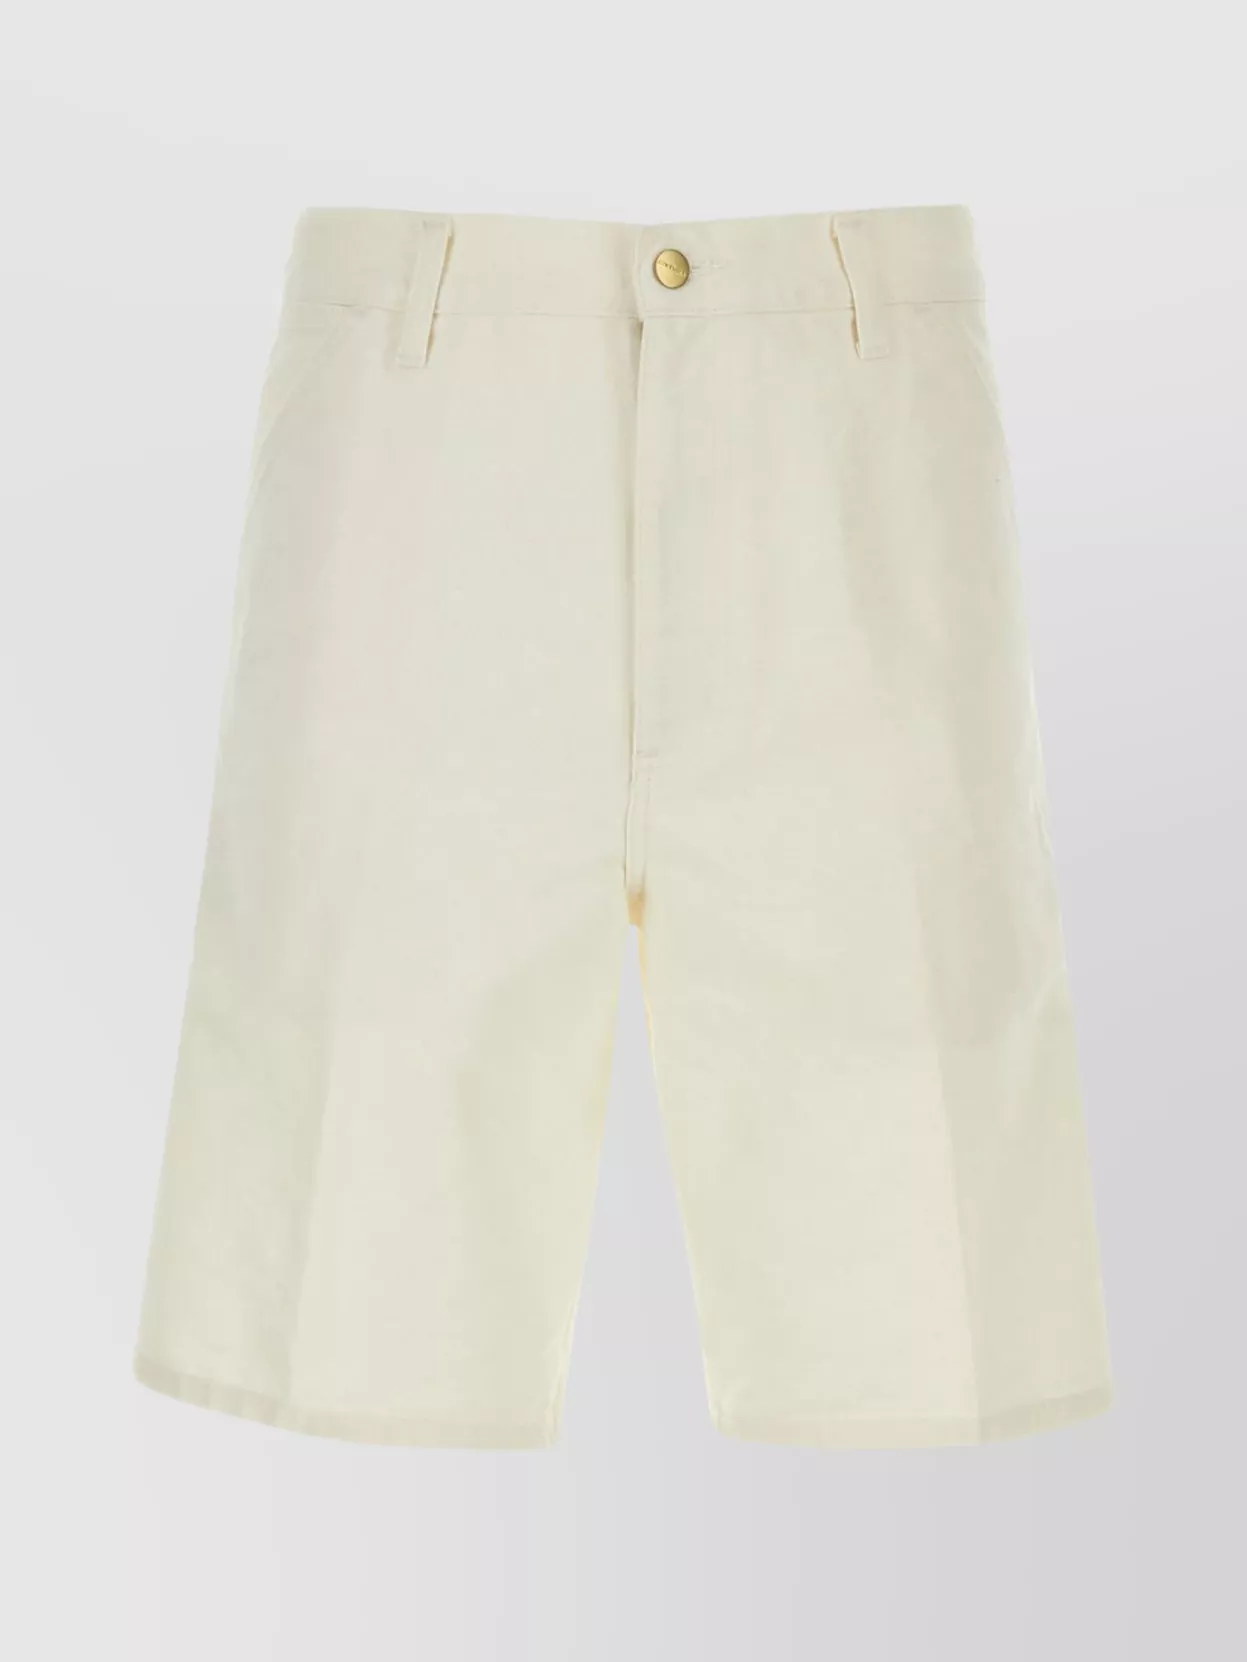 Carhartt Cotton Shorts With Knee Patch Pockets In White